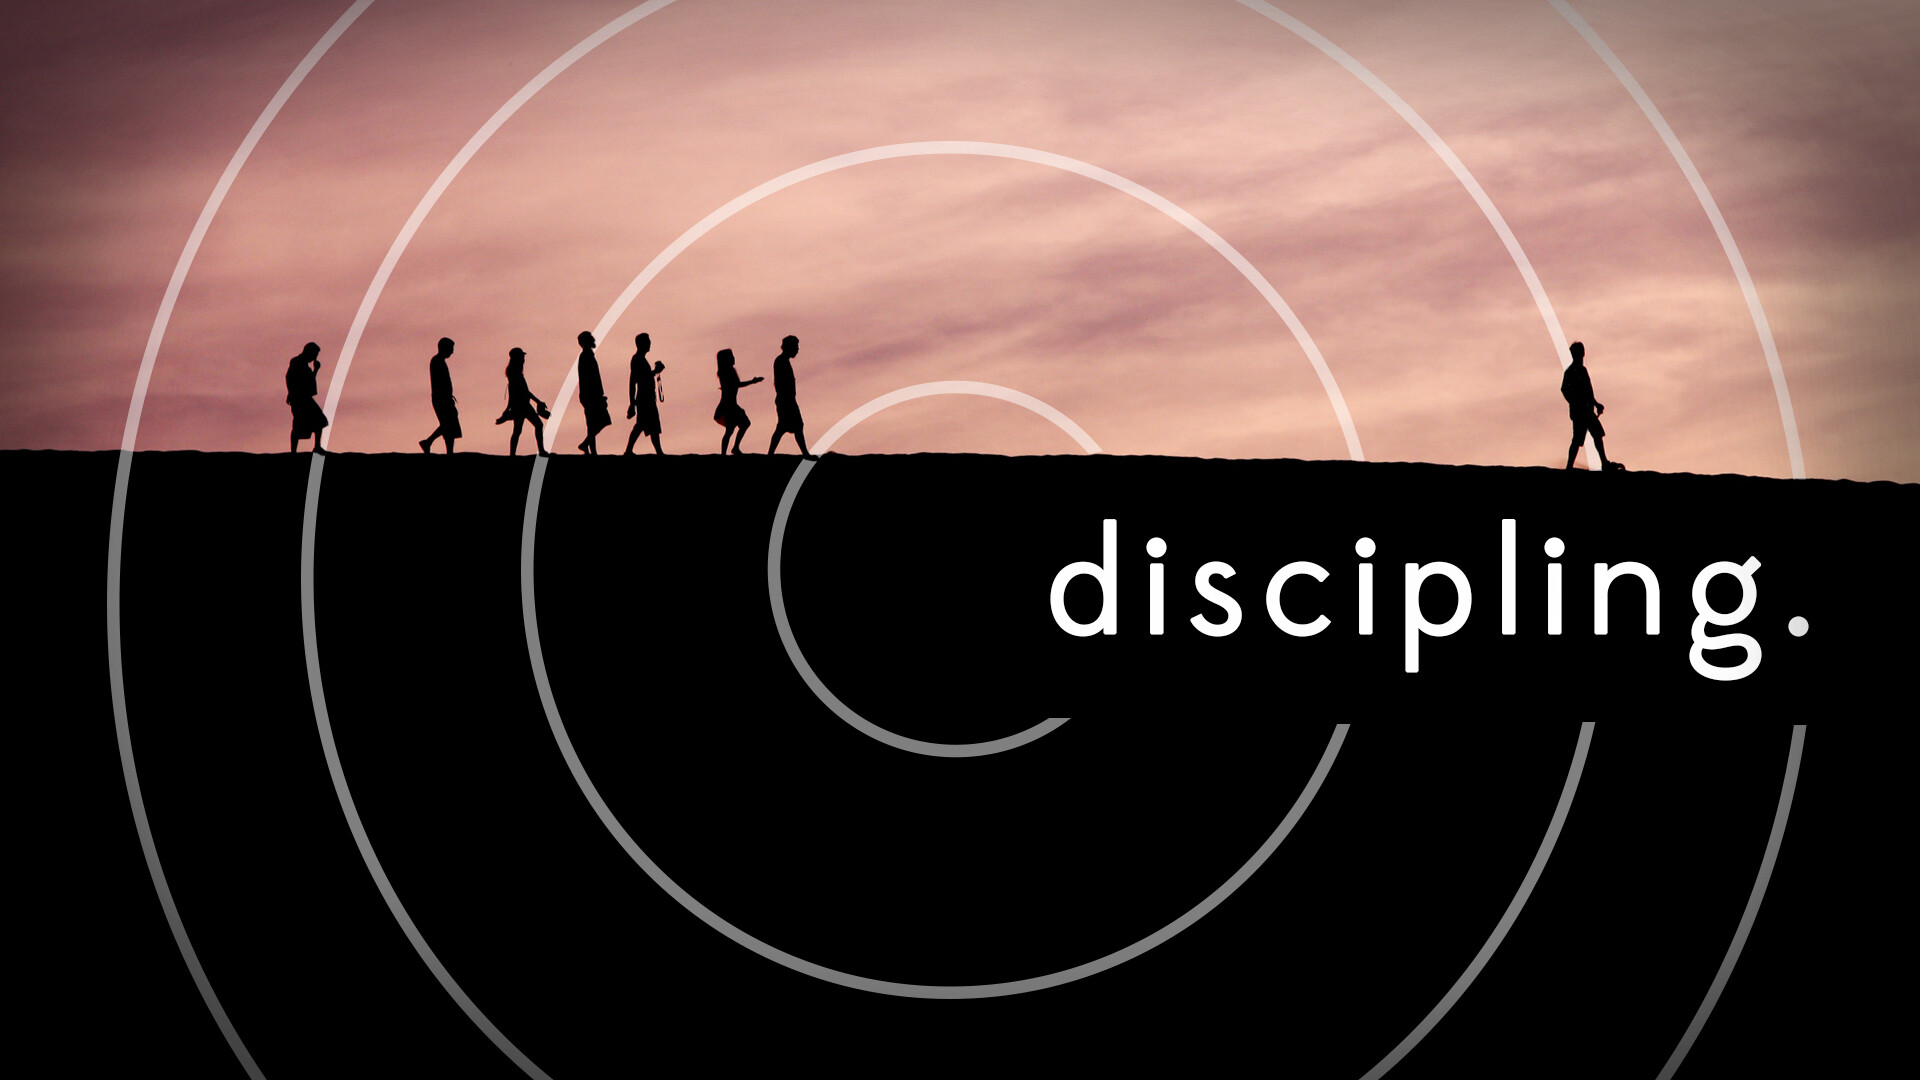 How We Disciple One Another